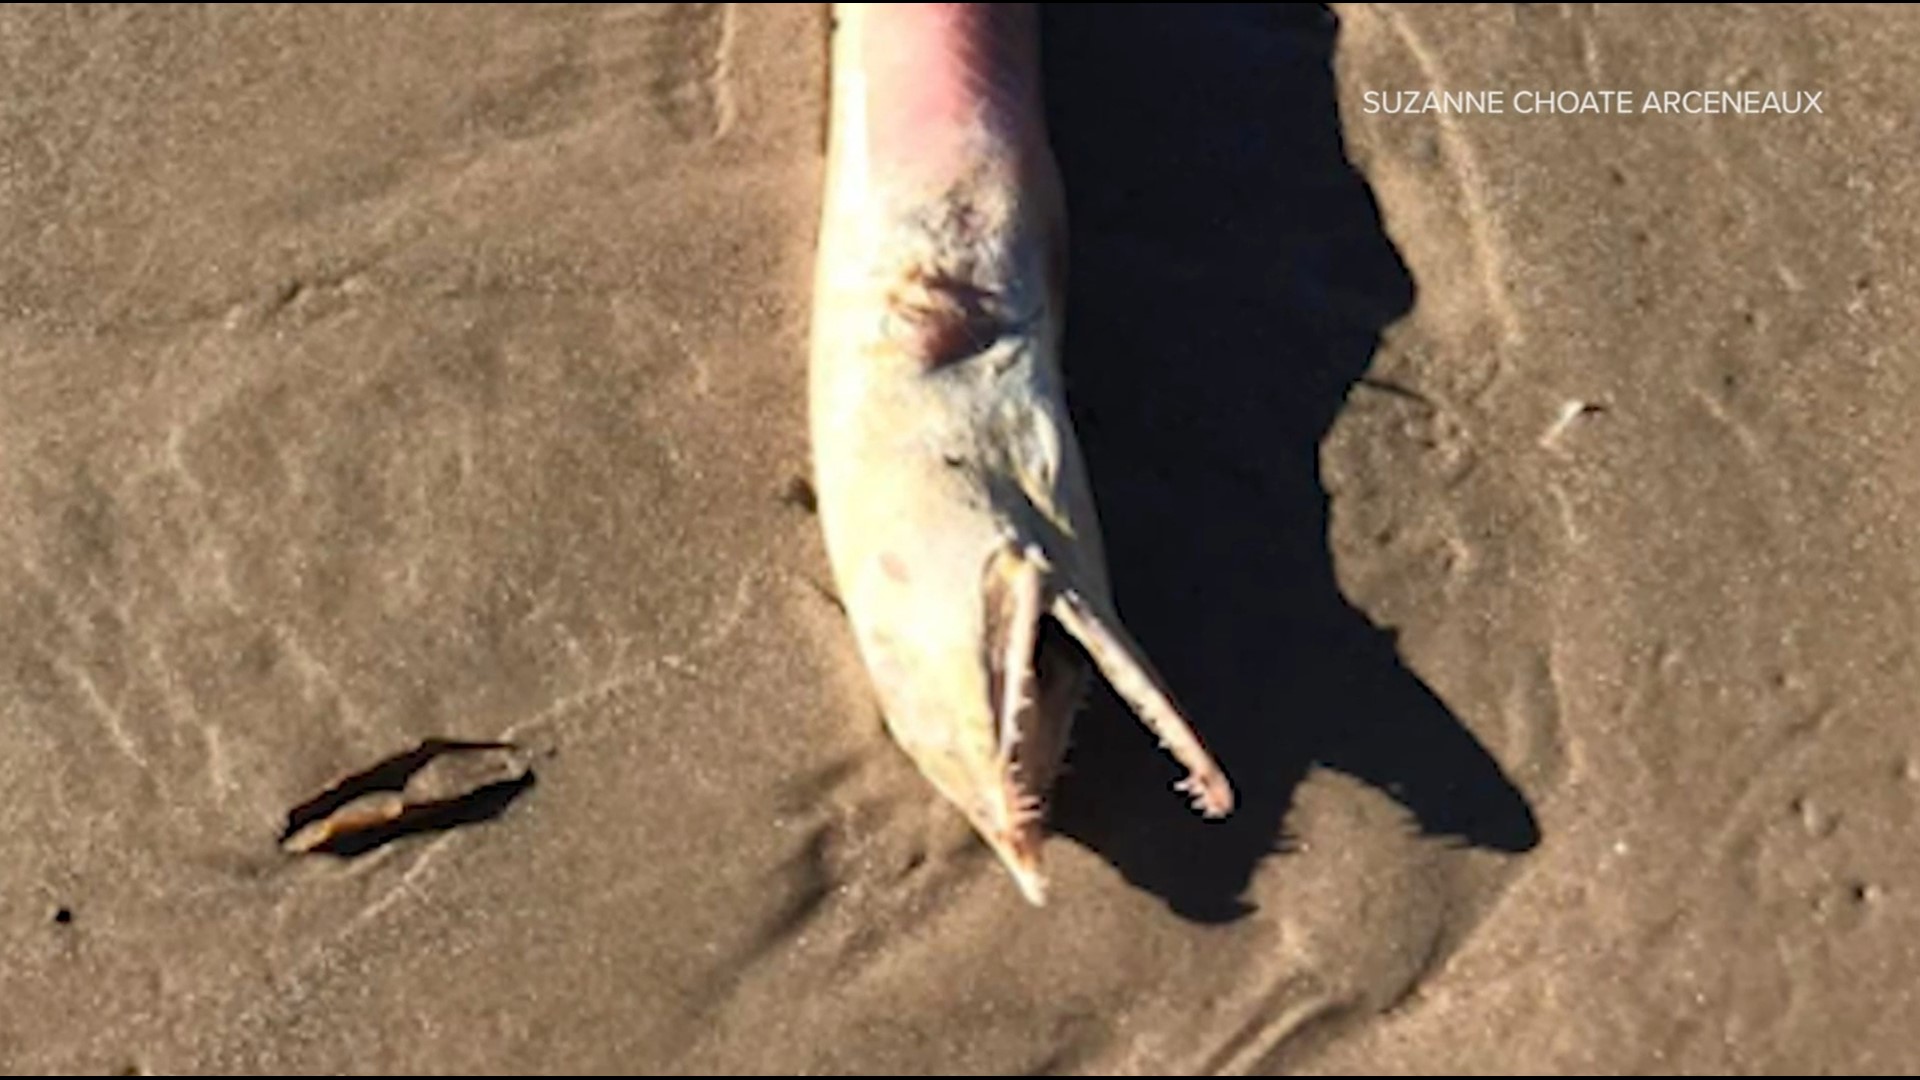 The Texas Parks and Wildlife Department told the San Antonio Express-News it could be a snapped eel, which is somewhat common in Galveston Bay.